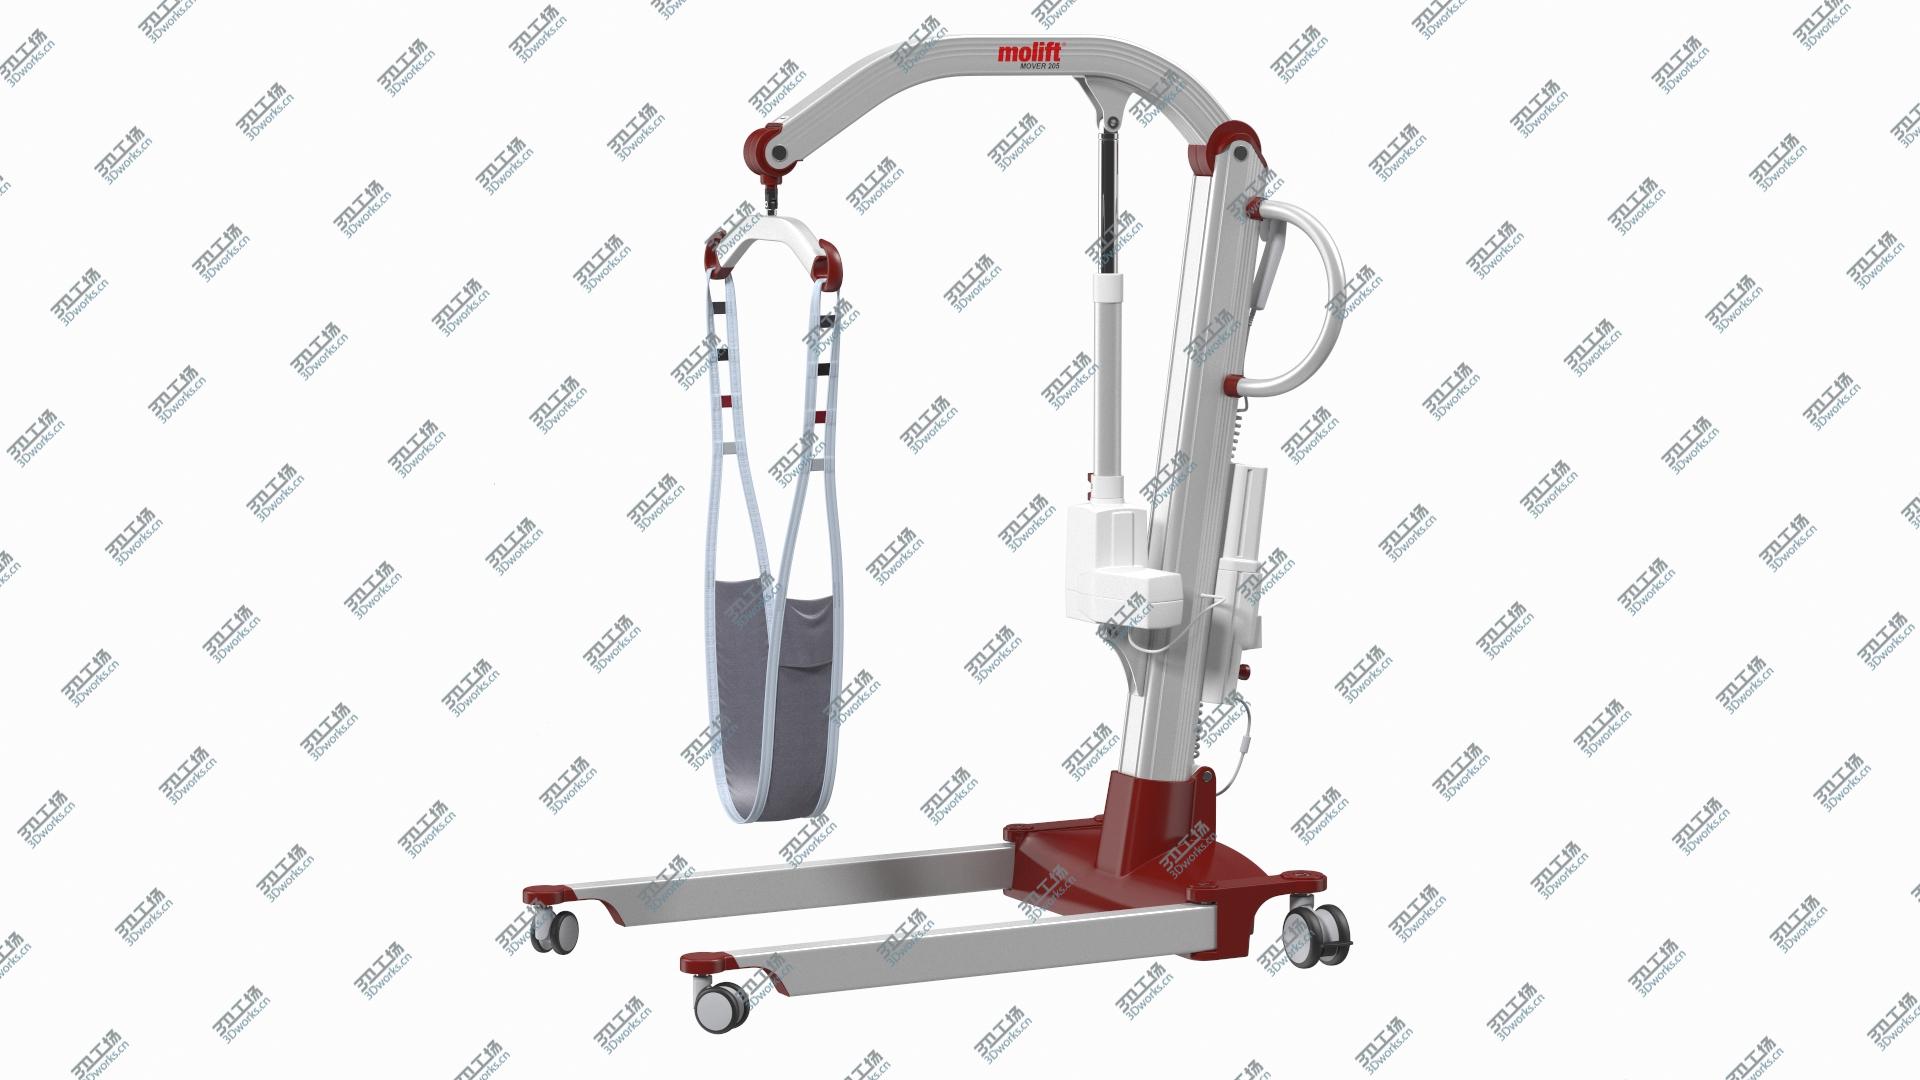 images/goods_img/202104091/Patient Lift Molift Mover 205 with FlexiStrap Rigged 3D model/2.jpg